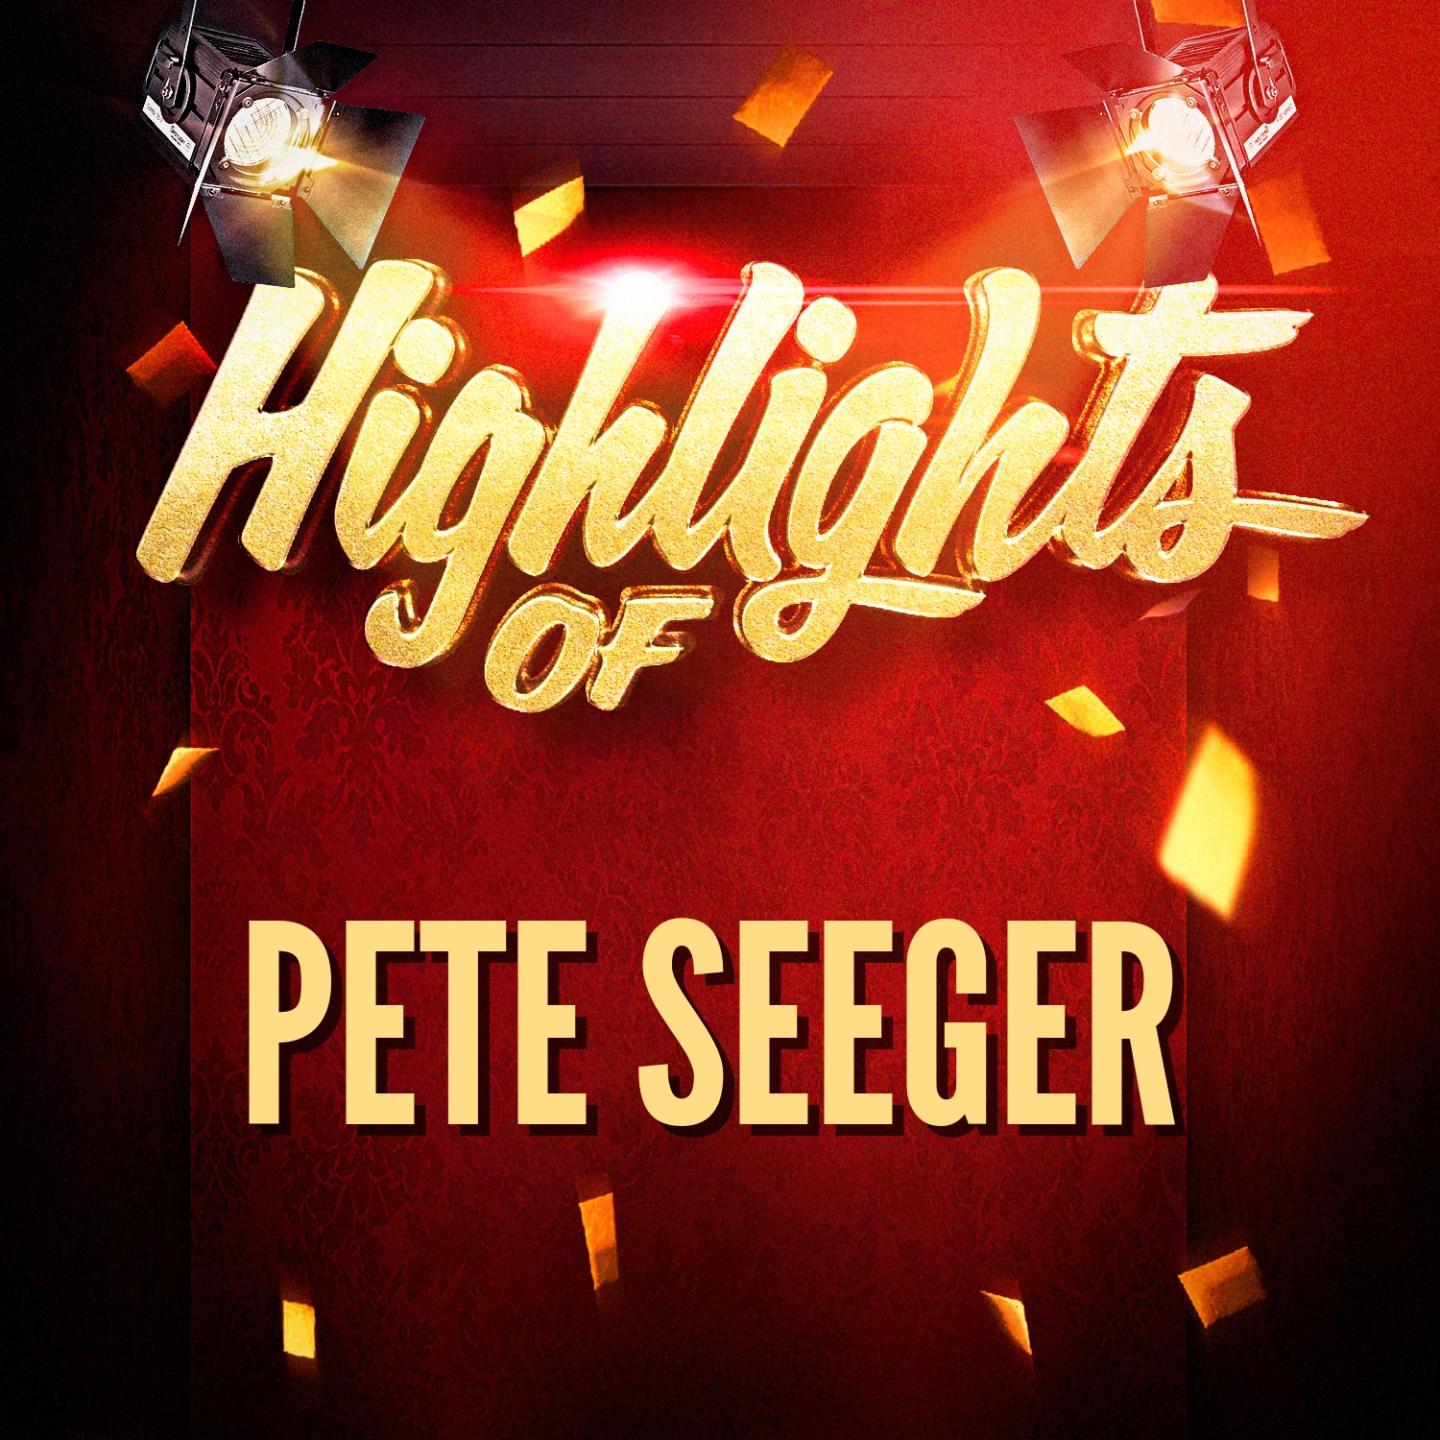 Highlights of Pete Seeger